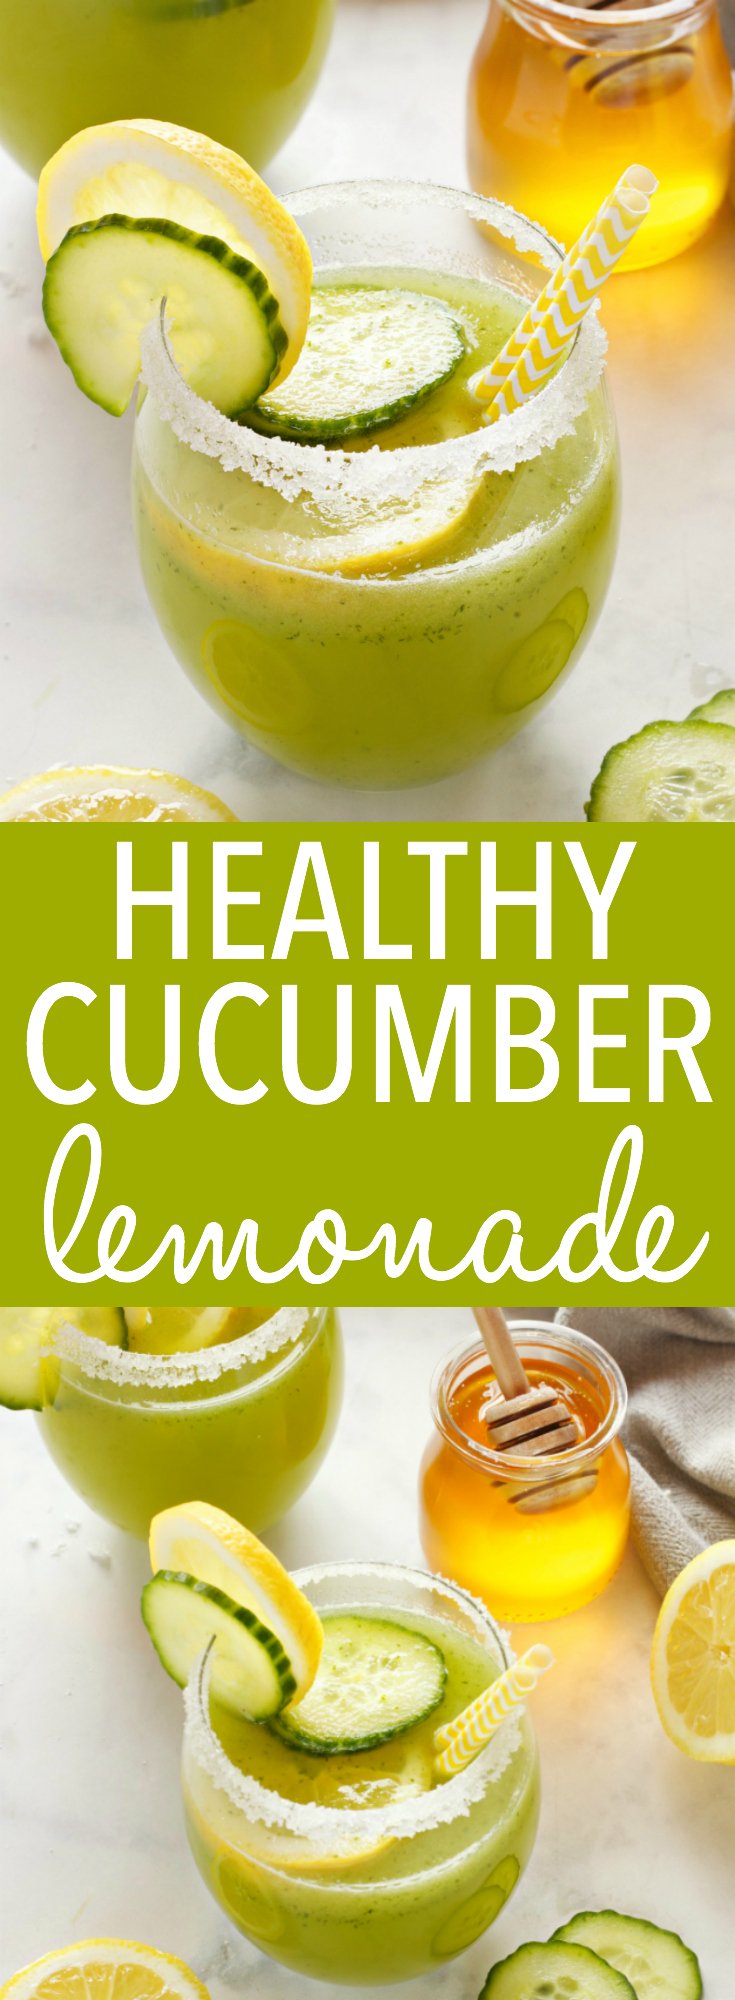 This Healthy Cucumber Lemonade is the perfect naturally-sweetened summer drink made from blended cucumbers, fresh lemon juice and honey! Get this easy summer recipe at thebusybaker.ca! via @busybakerblog